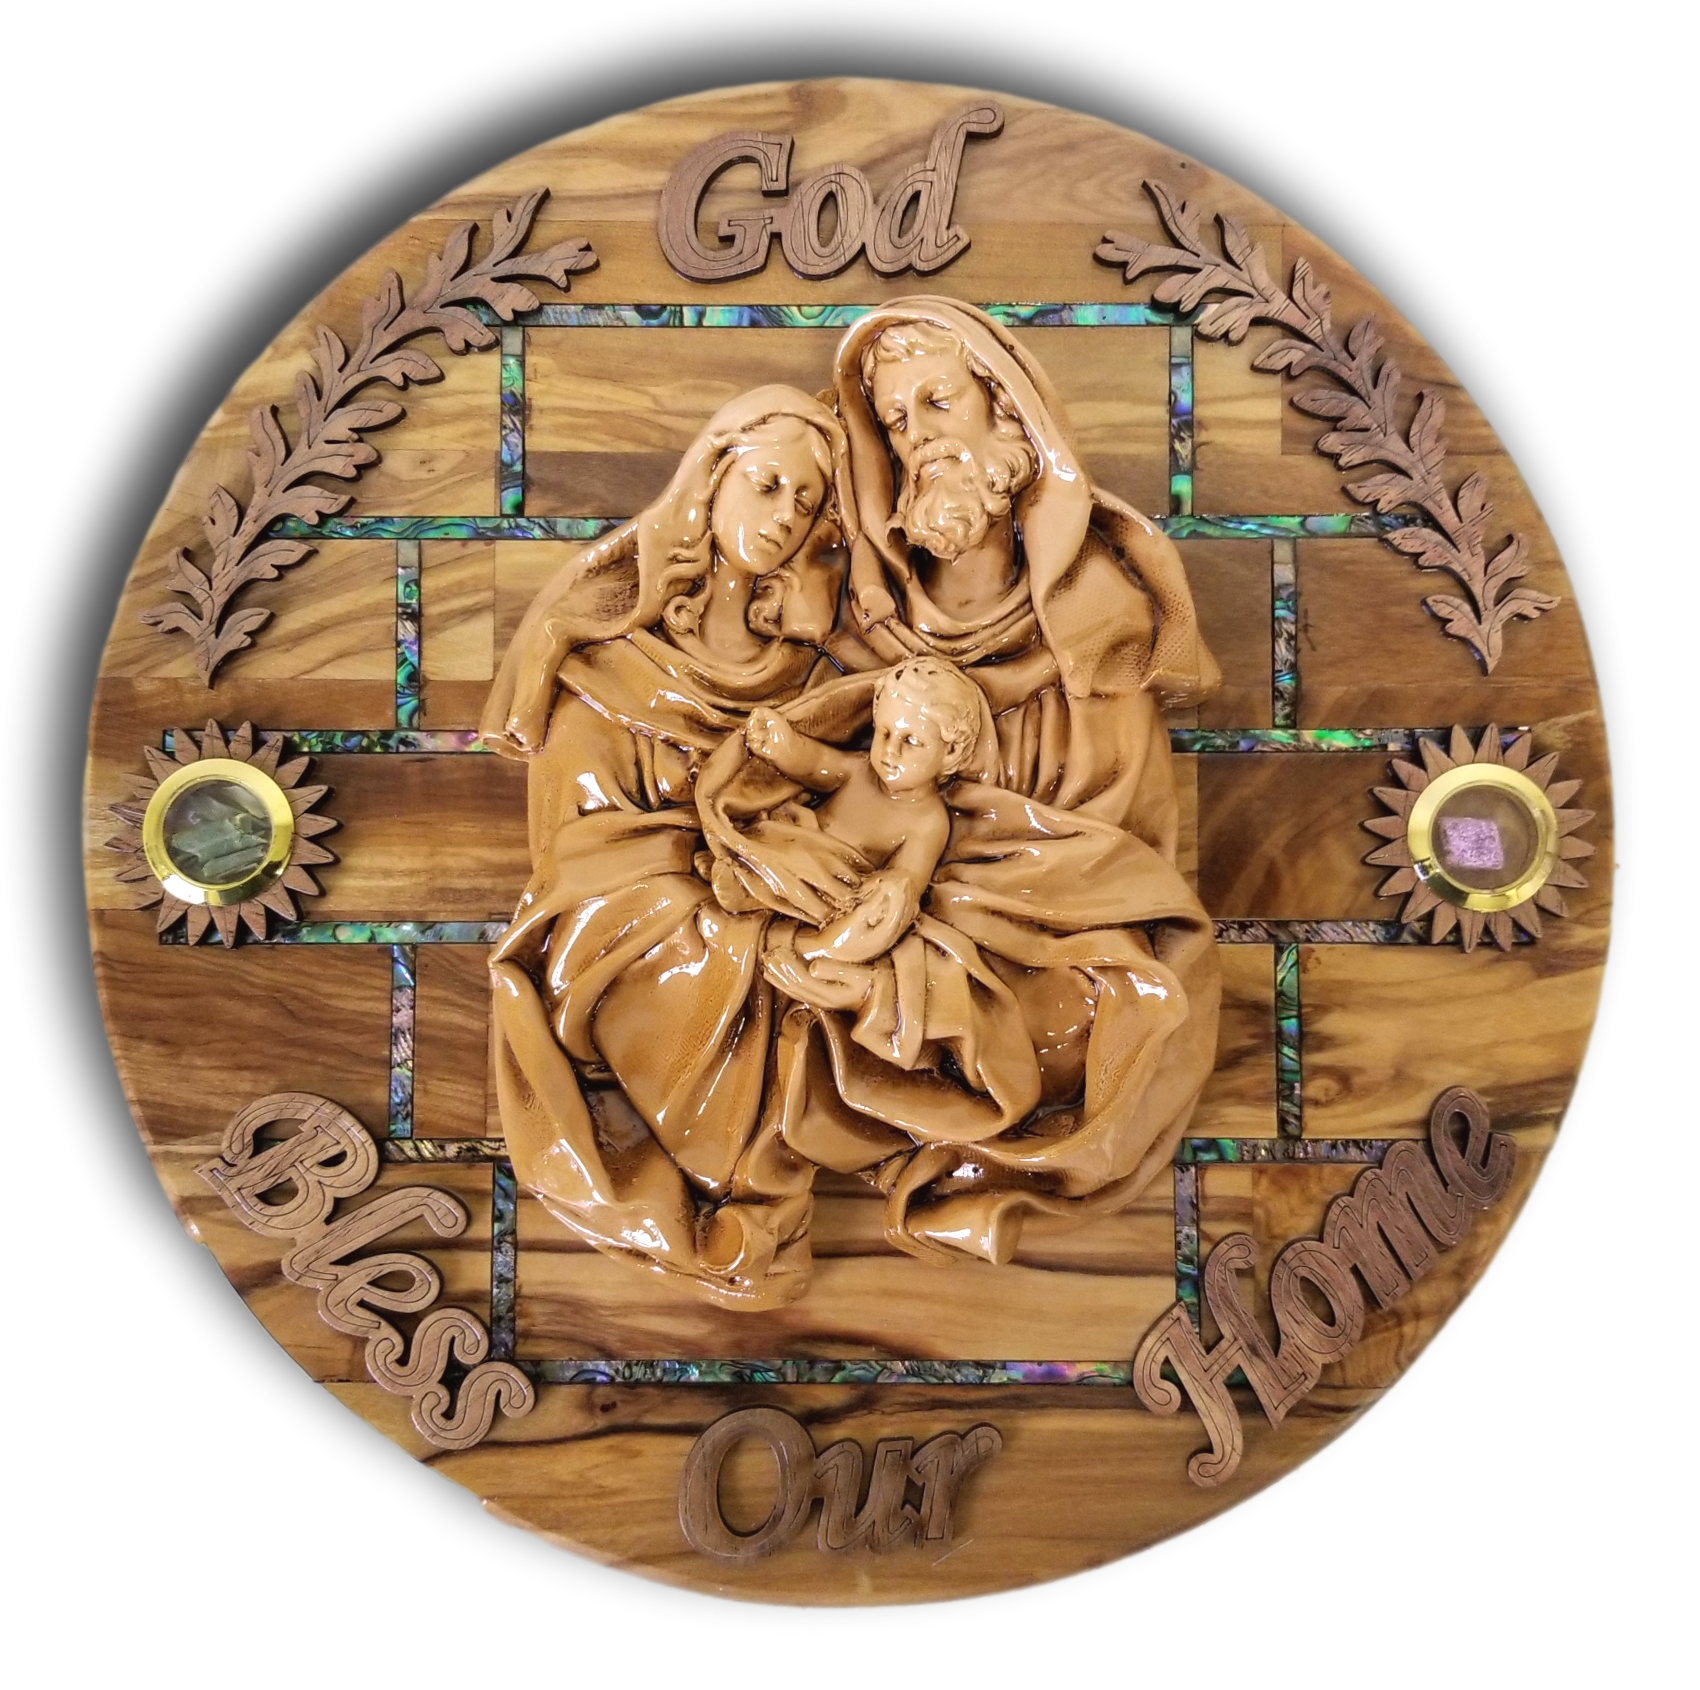 Round plaque with Abalone seashells, Porcelain figures, and holy items